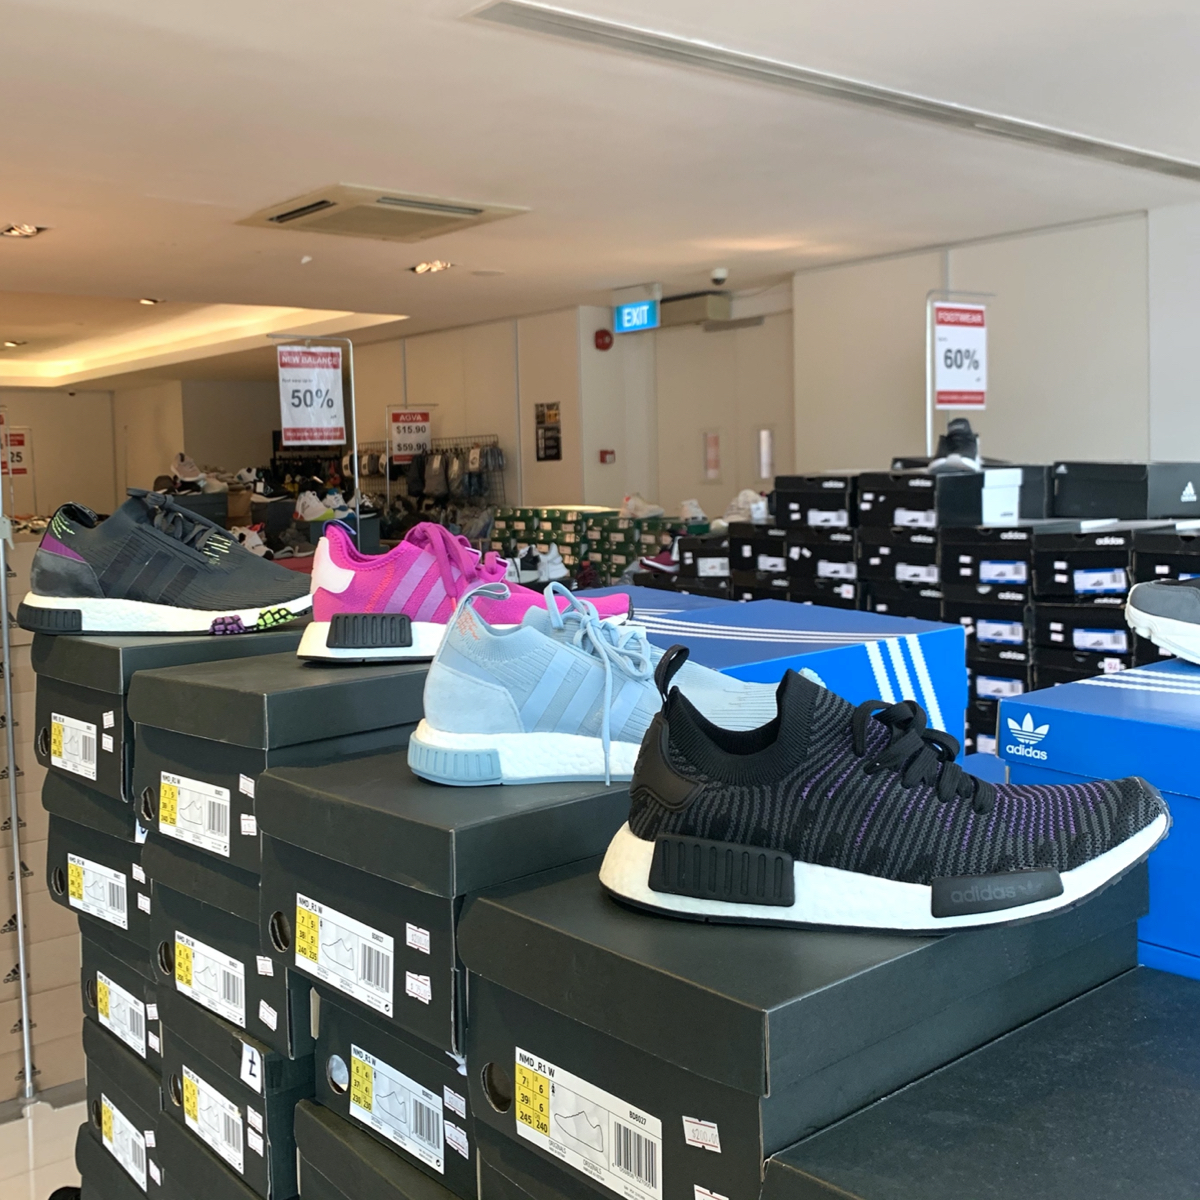 LINK Outlet Sale has up to 80% off branded shoes, bags, accessories & more (30 Jul – 2 Aug 2020) - 16